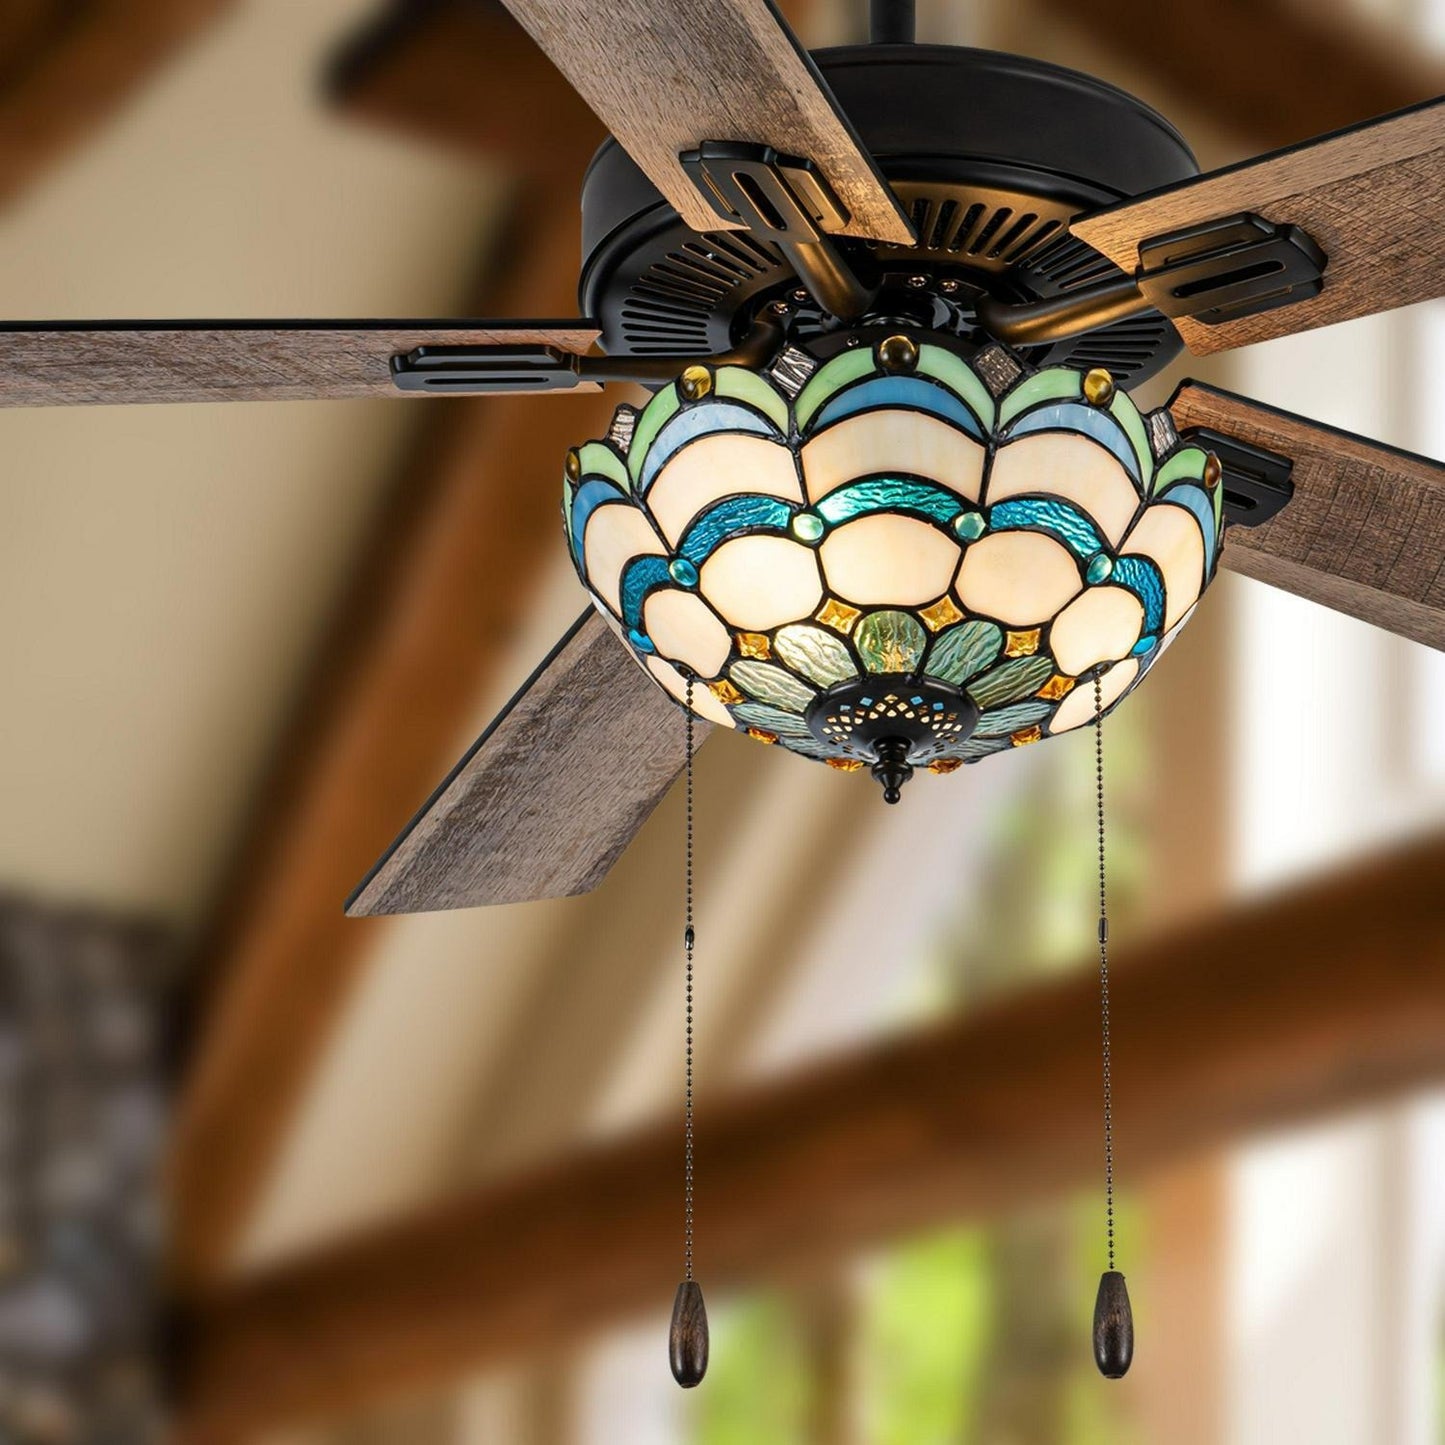 Ceiling Fan Multicolored Oil-Rubbed Bronze and Stained Glass 3-Light 52-Inch